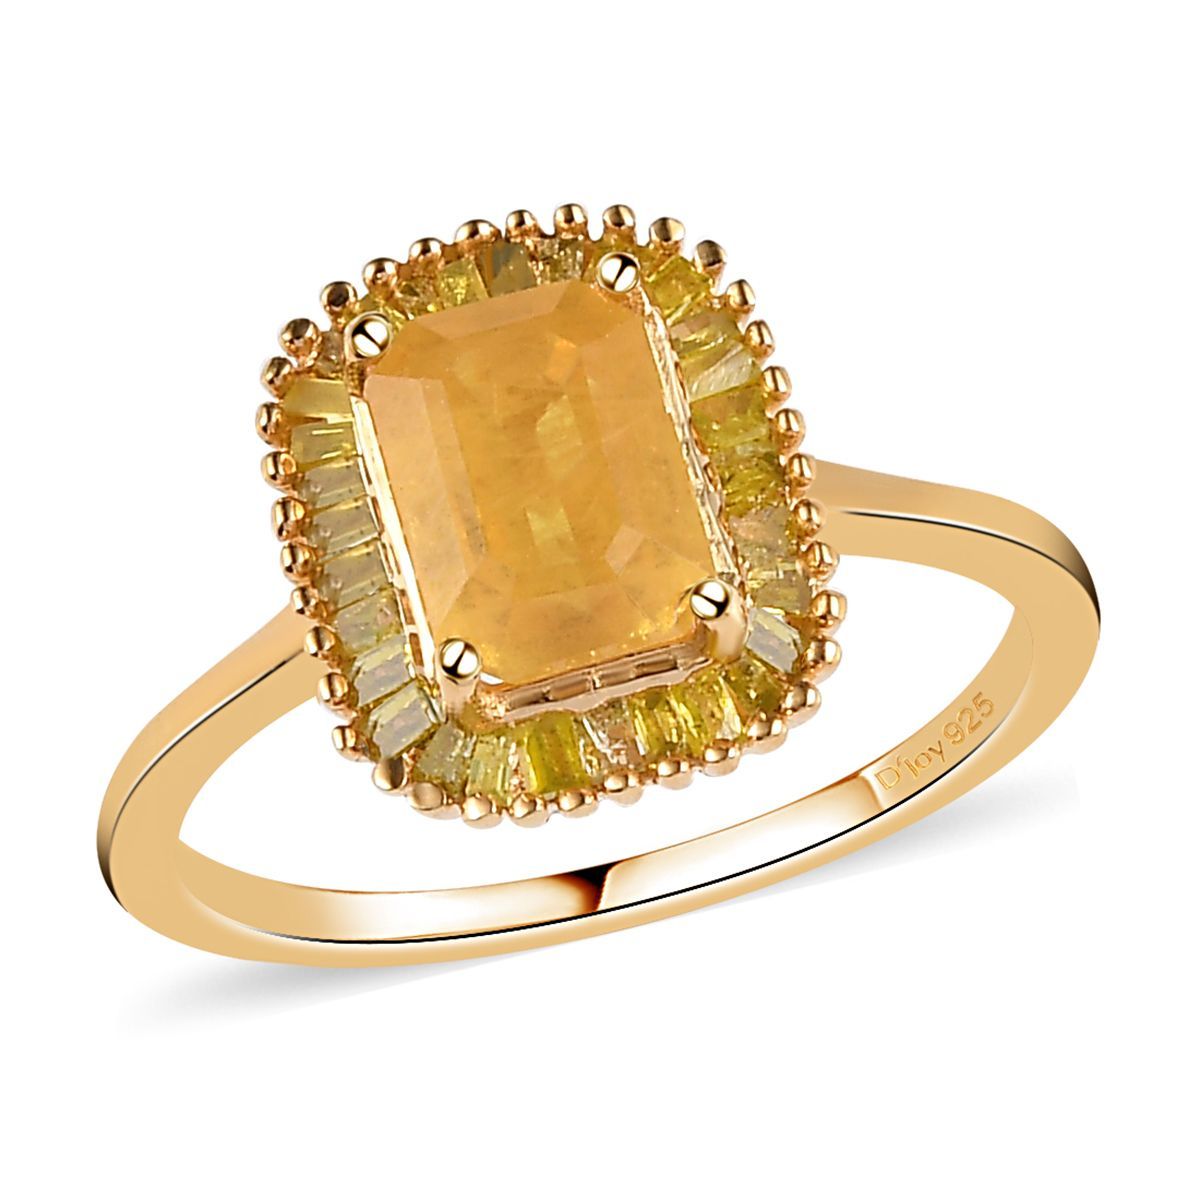 Buy Madagascar Yellow Sapphire And Yellow Diamond Halo Ring In Vermeil  Yellow Gold Over Sterling Silver (size 10.0) 1.40 Ctw At Shoplc (View 4 of 25)